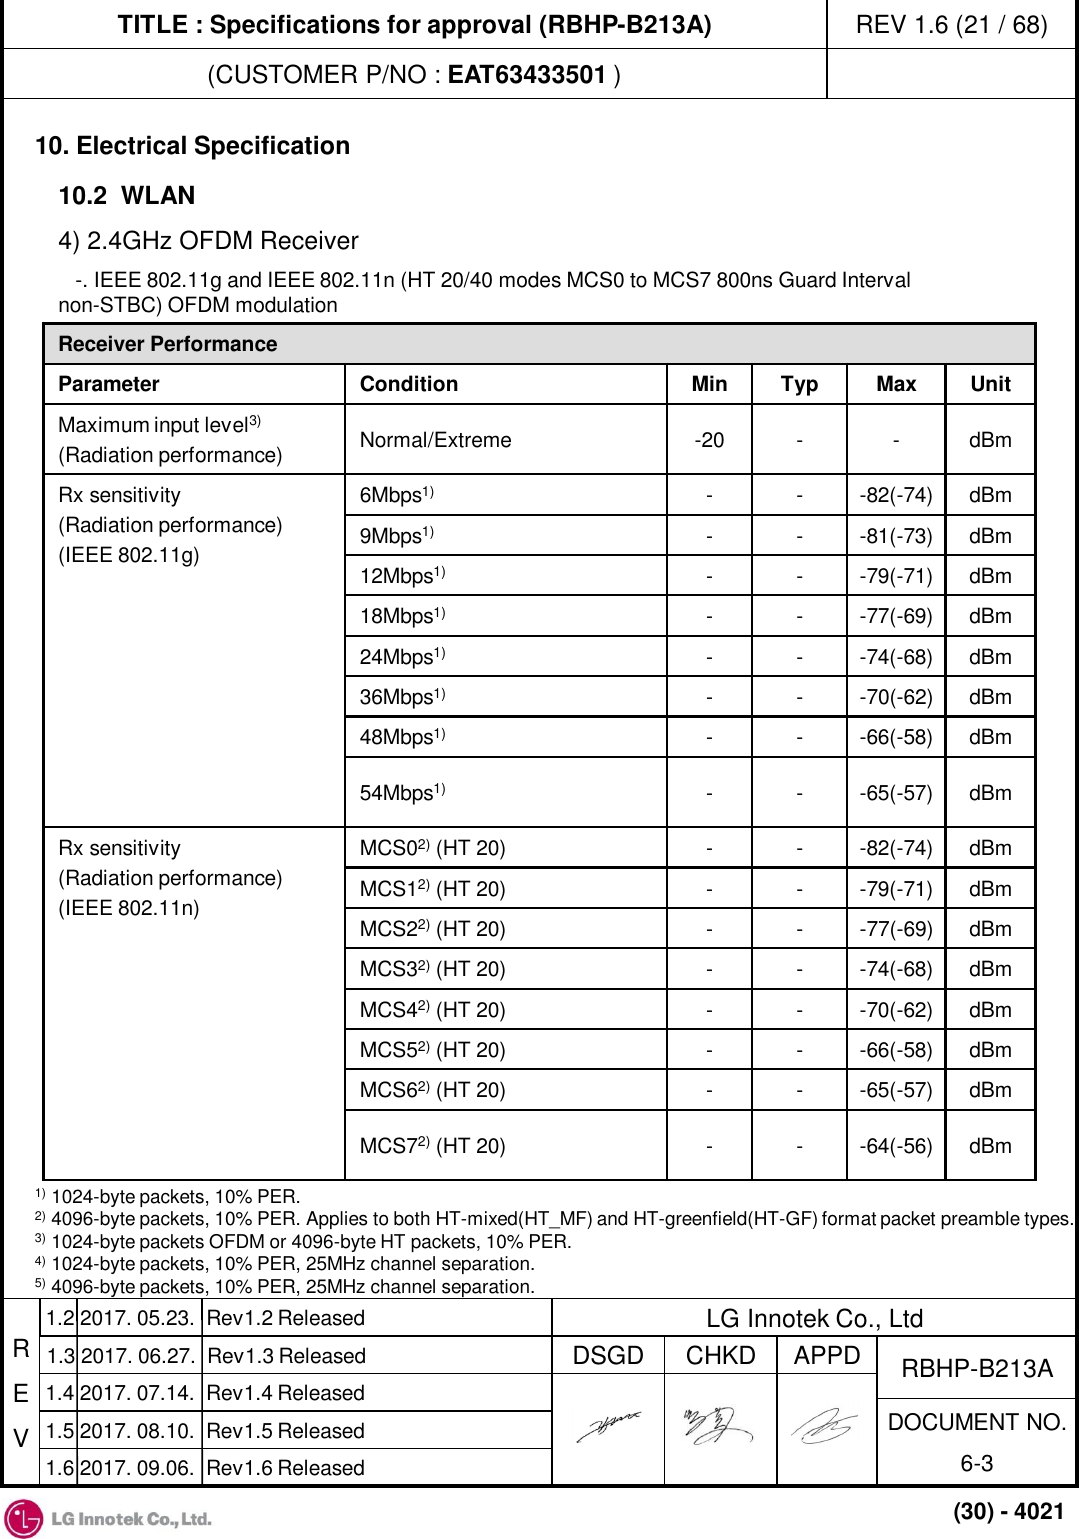 TITLE : Specifications for approval (RBHP-B213A) (CUSTOMER P/NO : EAT63433501 ) REV 1.6 (21 / 68) R E V APPD CHKD DSGD DOCUMENT NO. 6-3 RBHP-B213A LG Innotek Co., Ltd 1.4 2017. 07.14.  Rev1.4 Released 1.5 2017. 08.10.  Rev1.5 Released (30) - 4021 1.2 2017. 05.23.  Rev1.2 Released 1.3 2017. 06.27.  Rev1.3 Released 1.6 2017. 09.06.  Rev1.6 Released 10. Electrical Specification 4) 2.4GHz OFDM Receiver    -. IEEE 802.11g and IEEE 802.11n (HT 20/40 modes MCS0 to MCS7 800ns Guard Interval non-STBC) OFDM modulation 10.2  WLAN  Receiver Performance Parameter  Condition  Min  Typ  Max  Unit Maximum input level3) (Radiation performance)  Normal/Extreme  -20  -  -  dBm Rx sensitivity (Radiation performance) (IEEE 802.11g)  6Mbps1) -  -  -82(-74)  dBm 9Mbps1)  -  -  -81(-73)  dBm 12Mbps1) -  -  -79(-71)  dBm 18Mbps1) -  -  -77(-69)  dBm 24Mbps1) -  -  -74(-68)  dBm 36Mbps1) -  -  -70(-62)  dBm 48Mbps1) -  -  -66(-58)  dBm 54Mbps1) -  -  -65(-57)  dBm Rx sensitivity (Radiation performance) (IEEE 802.11n) MCS02) (HT 20) -  -  -82(-74)  dBm MCS12) (HT 20) -  -  -79(-71)  dBm MCS22) (HT 20) -  -  -77(-69)  dBm MCS32) (HT 20) -  -  -74(-68)  dBm MCS42) (HT 20) -  -  -70(-62)  dBm MCS52) (HT 20) -  -  -66(-58)  dBm MCS62) (HT 20) -  -  -65(-57)  dBm MCS72) (HT 20) -  -  -64(-56)  dBm 1) 1024-byte packets, 10% PER. 2) 4096-byte packets, 10% PER. Applies to both HT-mixed(HT_MF) and HT-greenfield(HT-GF) format packet preamble types. 3) 1024-byte packets OFDM or 4096-byte HT packets, 10% PER. 4) 1024-byte packets, 10% PER, 25MHz channel separation. 5) 4096-byte packets, 10% PER, 25MHz channel separation. 